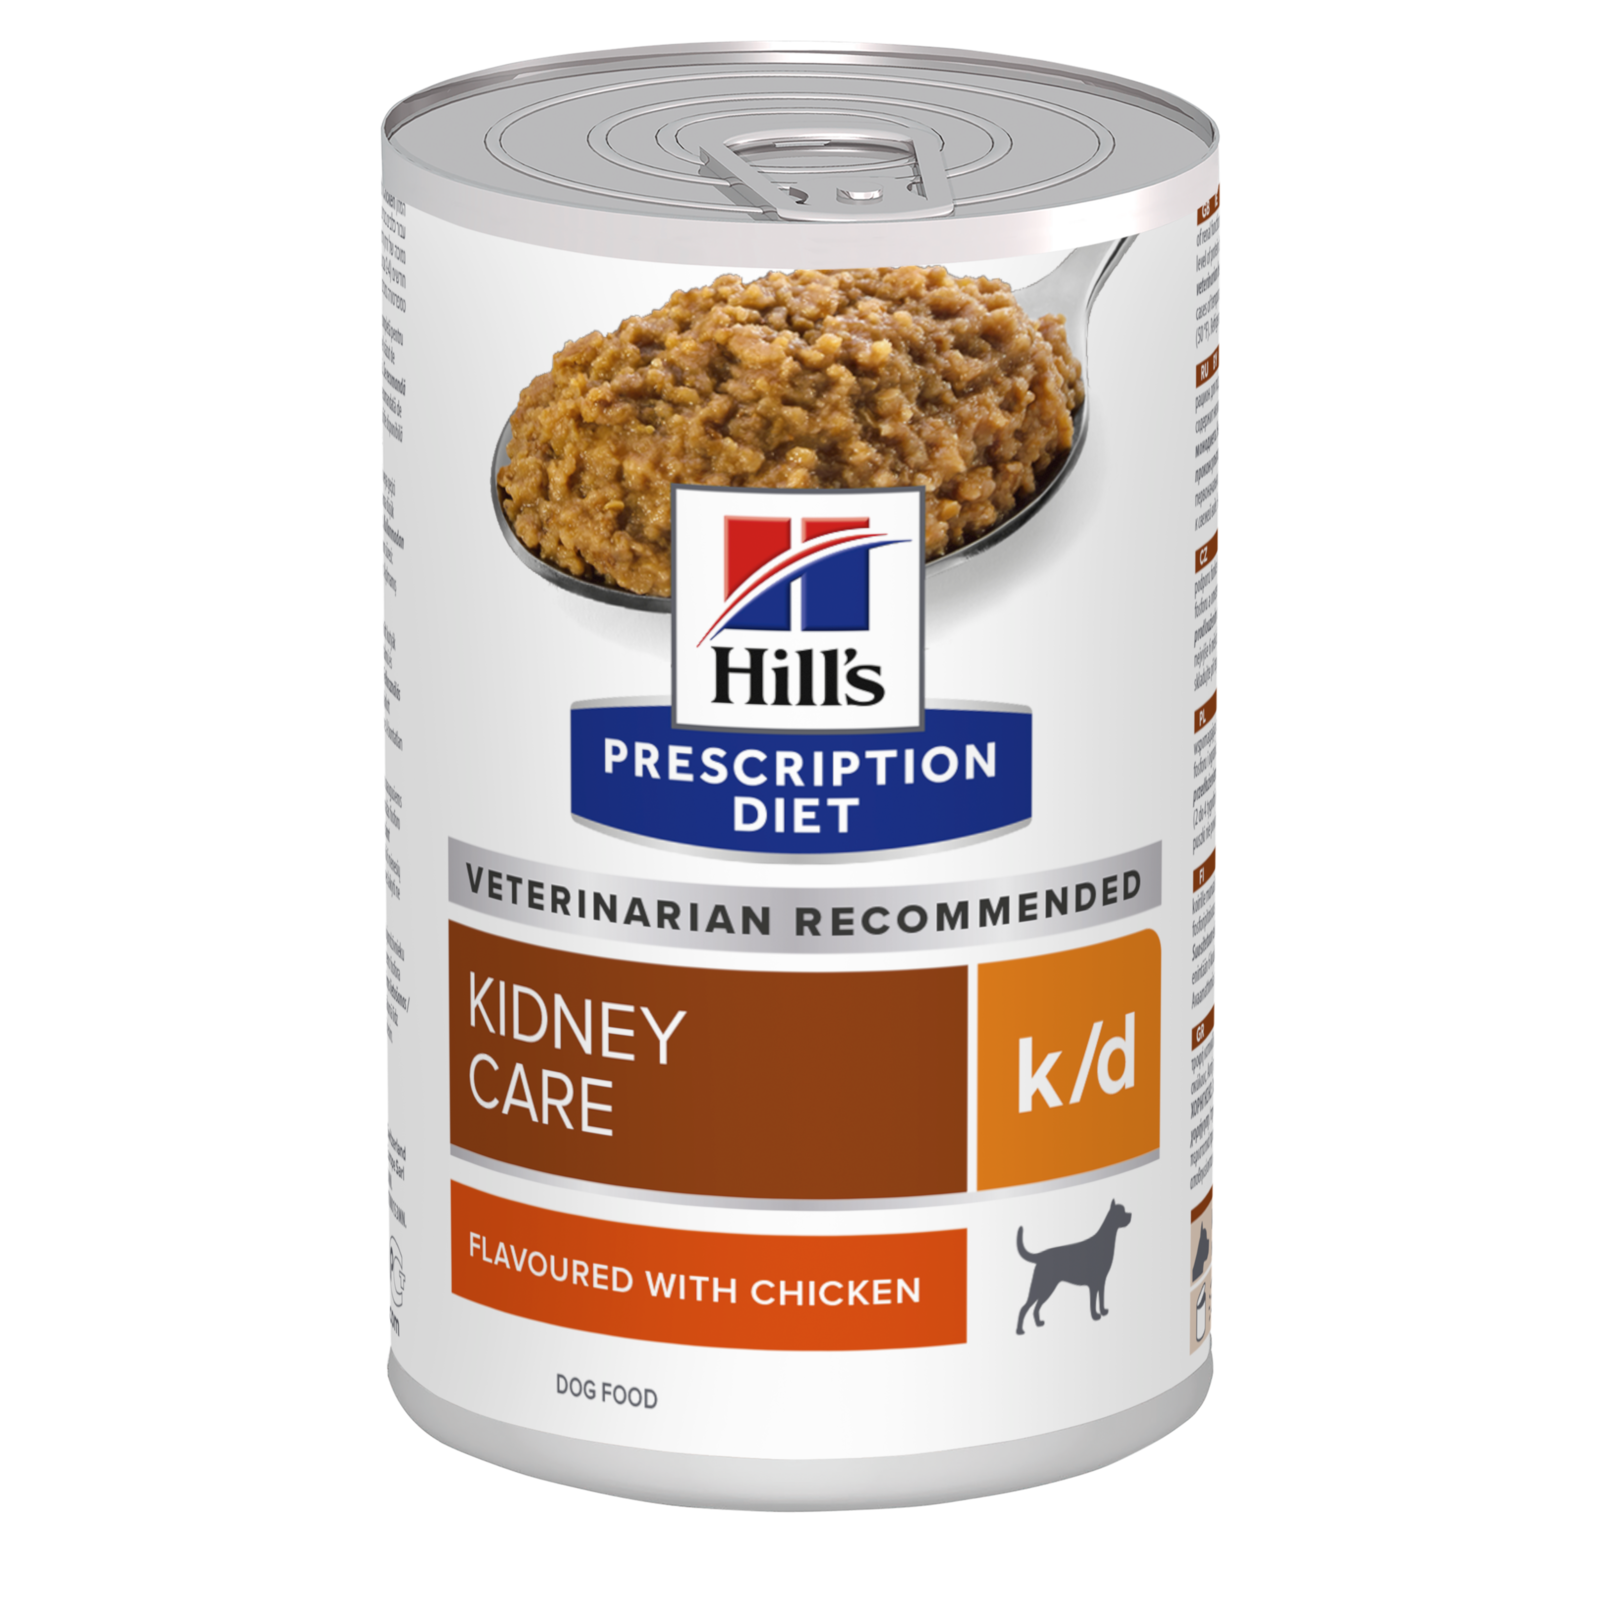 Hill's Prescription Diet Dog Food Can k/d Kidney Care with Chicken